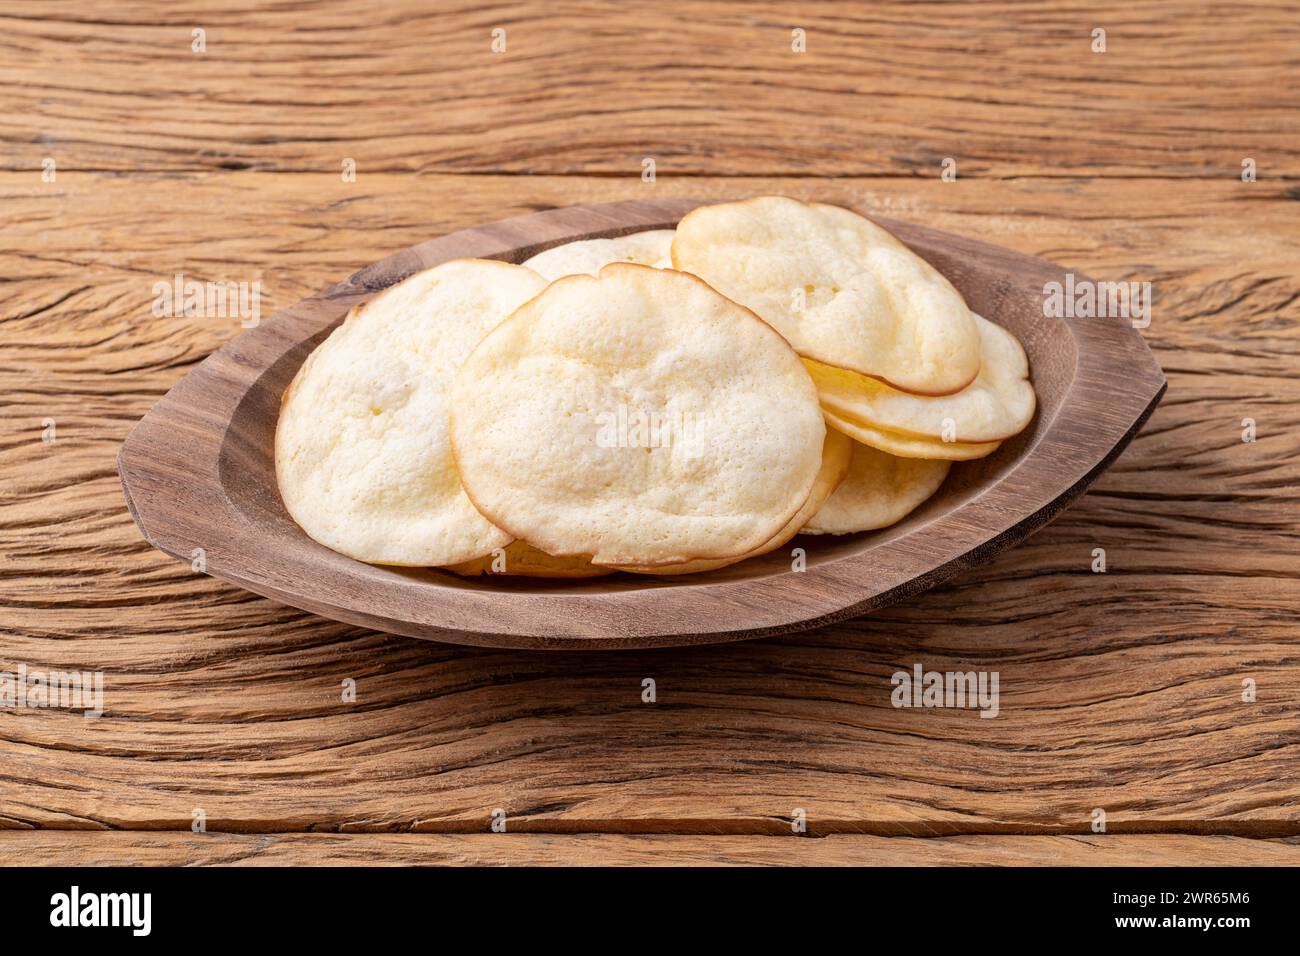 Smoked provolone cheese chips in a bowl over wooden table. Stock Photo